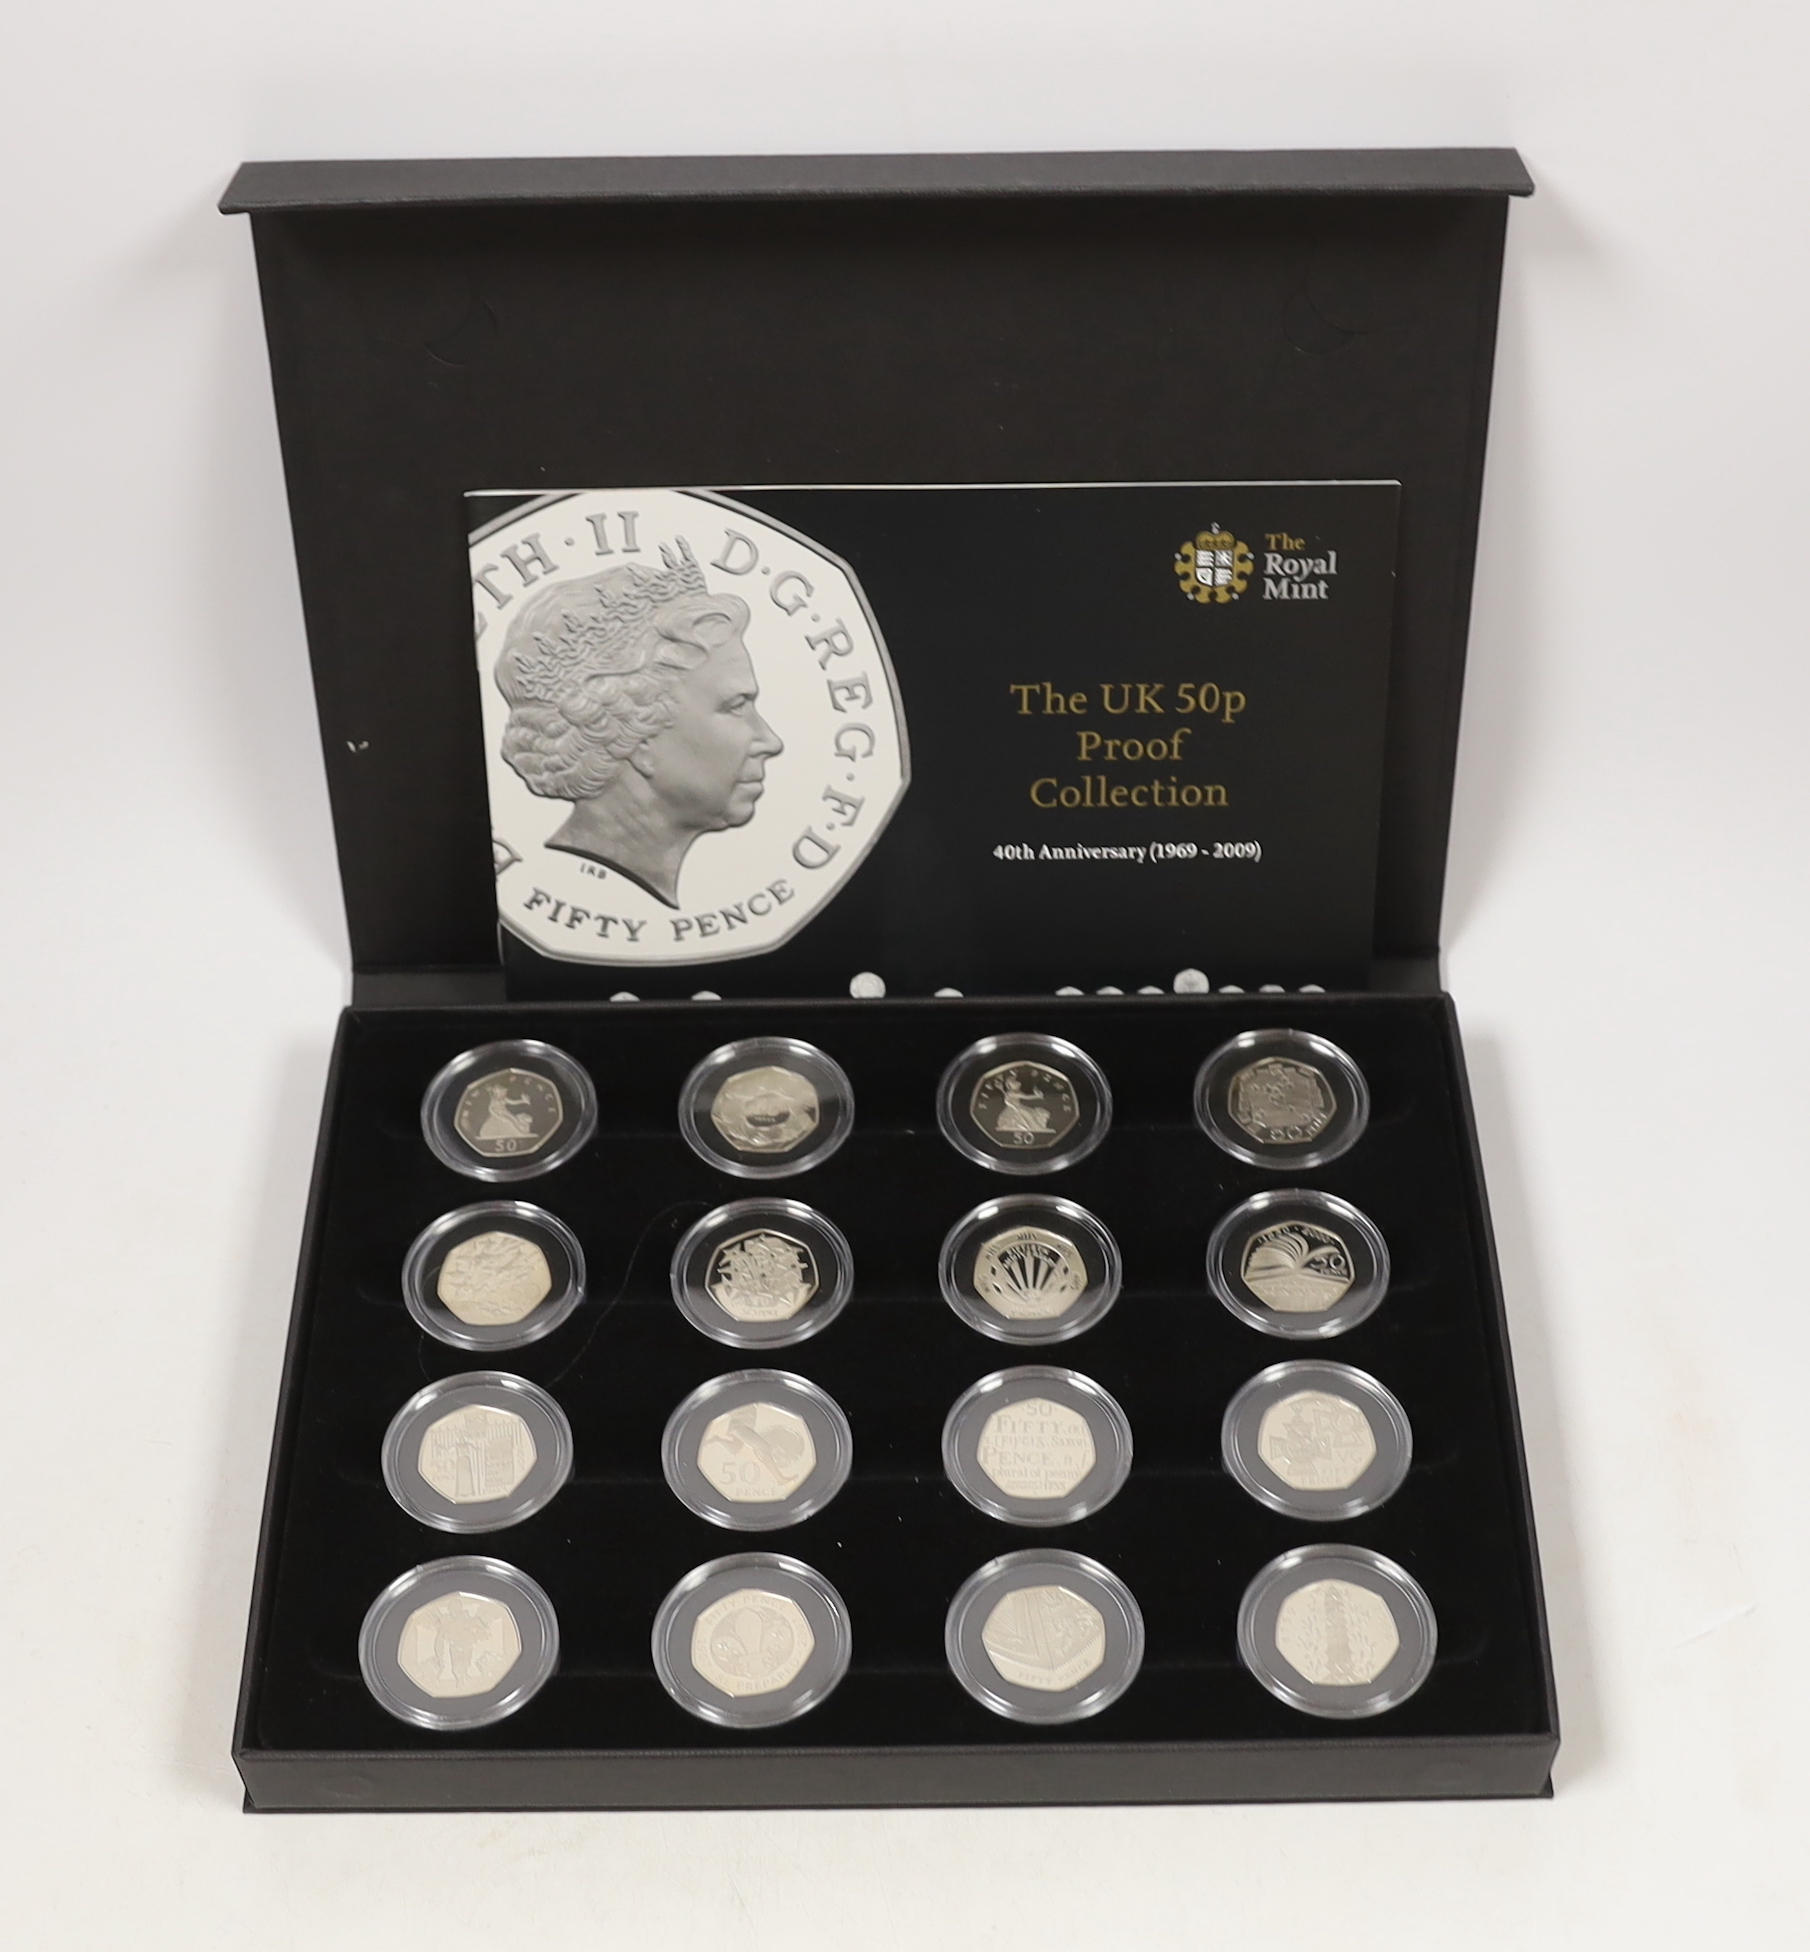 Royal Mint UK 50p proof collection 40th anniversary (1969–2009) to include the scarce Kew Gardens 2009 50p, cased